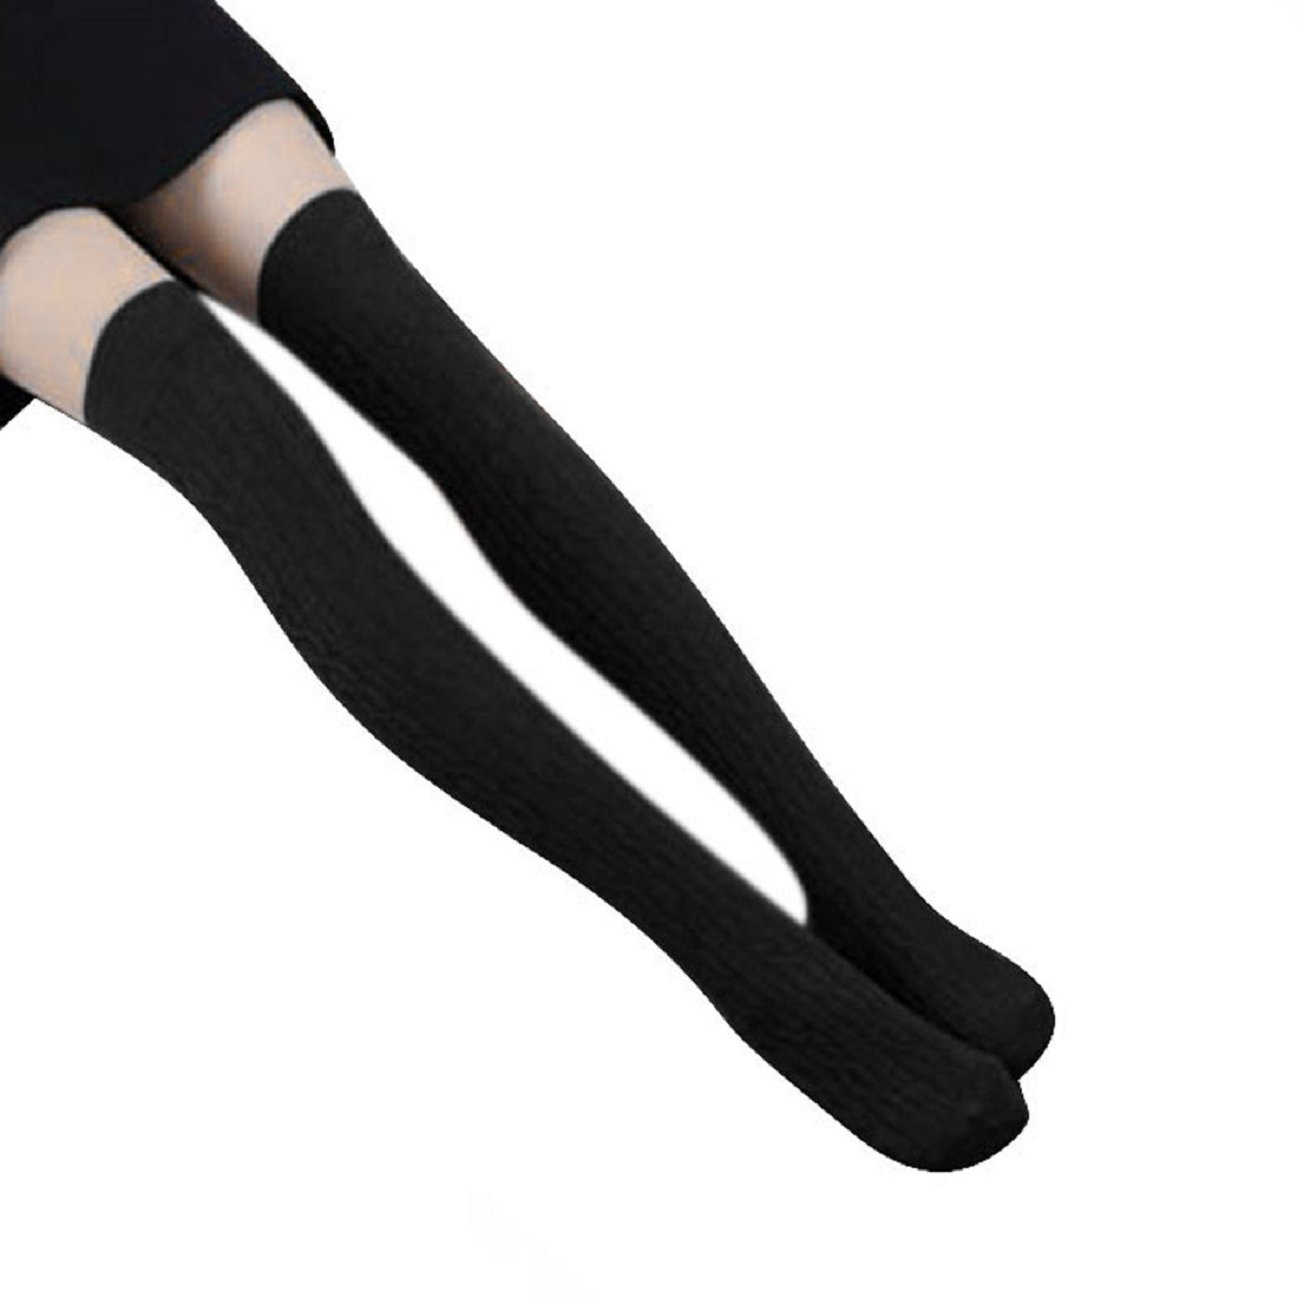 amtonseeshop Hot New Comfortable Warm Cotton Women Lady Girl Knit Over Knee Spiral Pattern Thigh Stockings High Socks (Black)